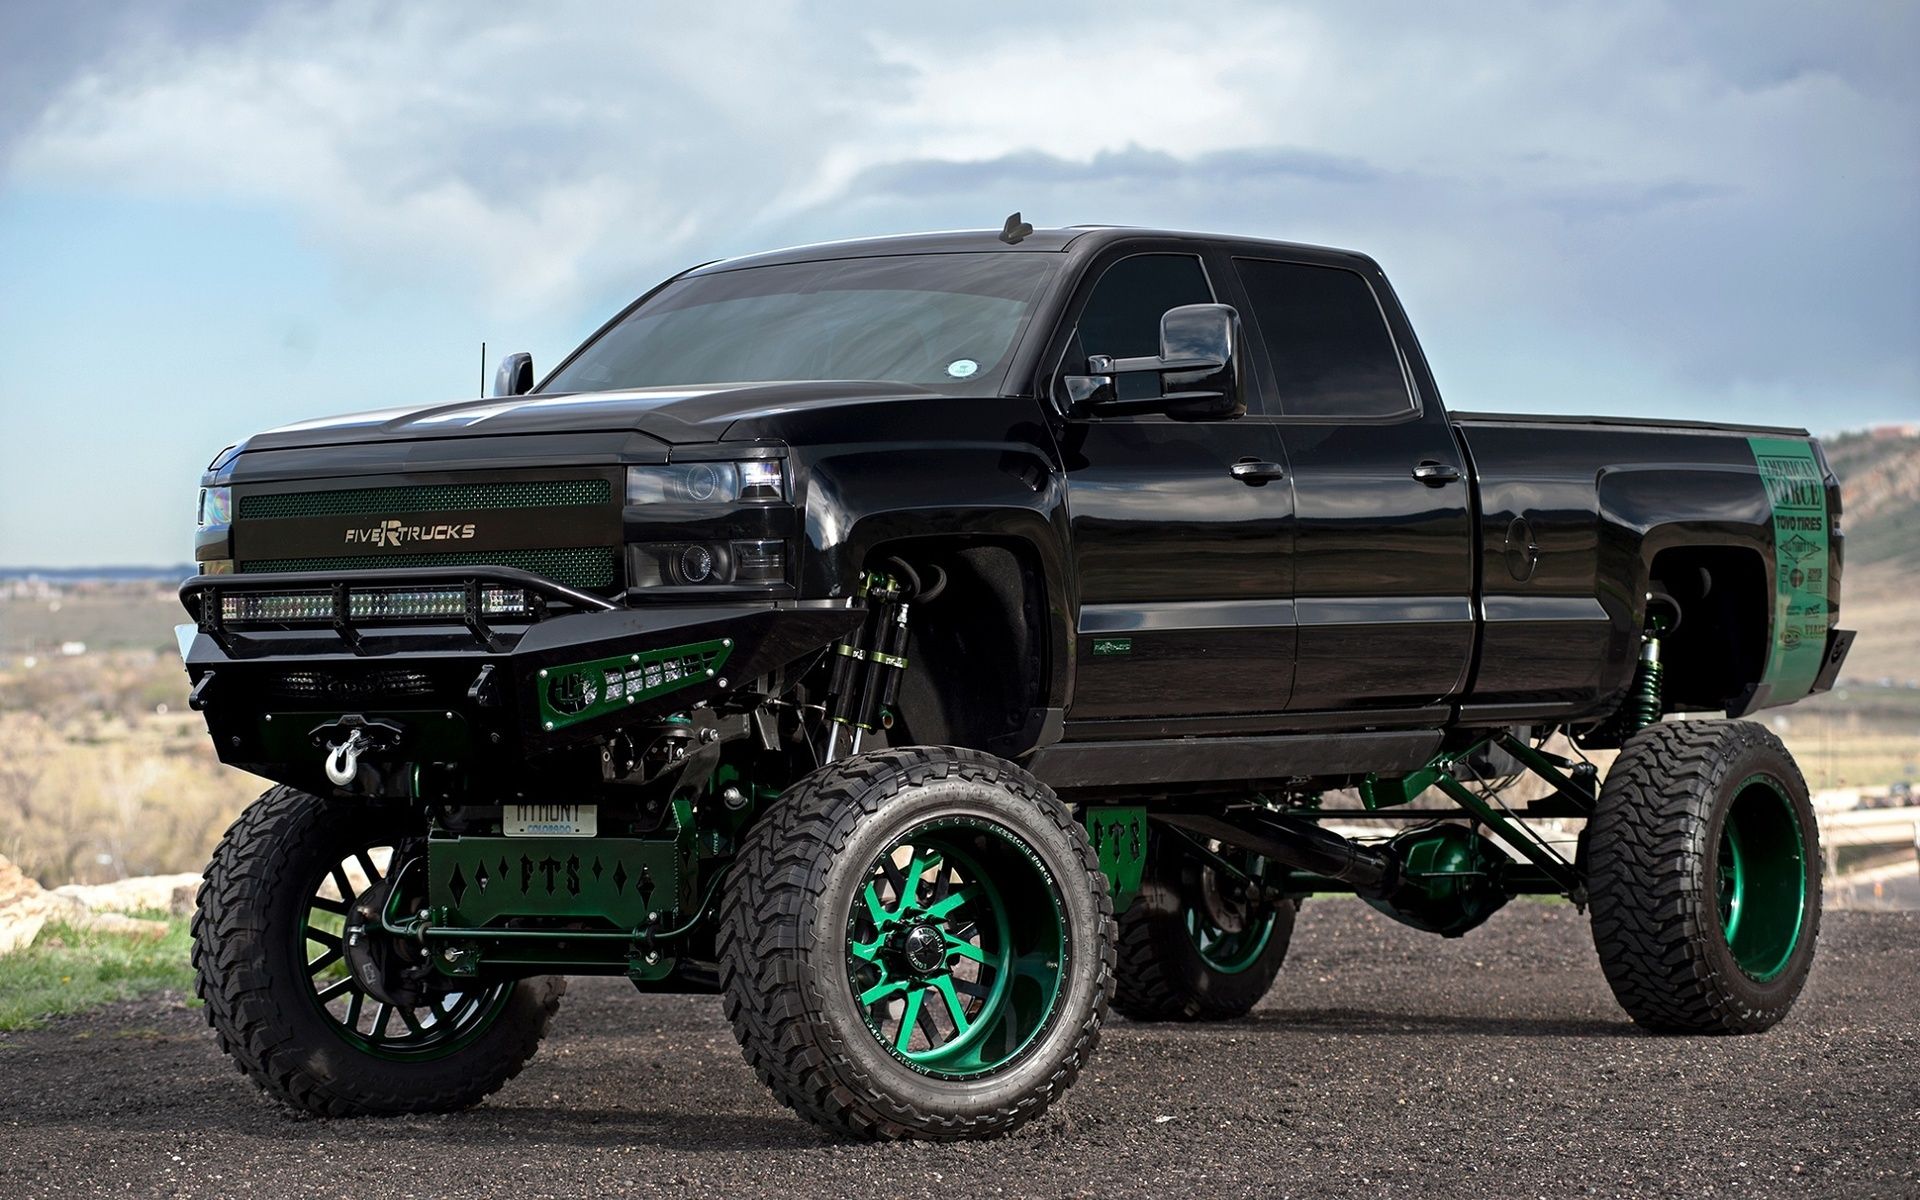 Lifted Chevy Trucks Wallpapers - Wallpaper Cave.